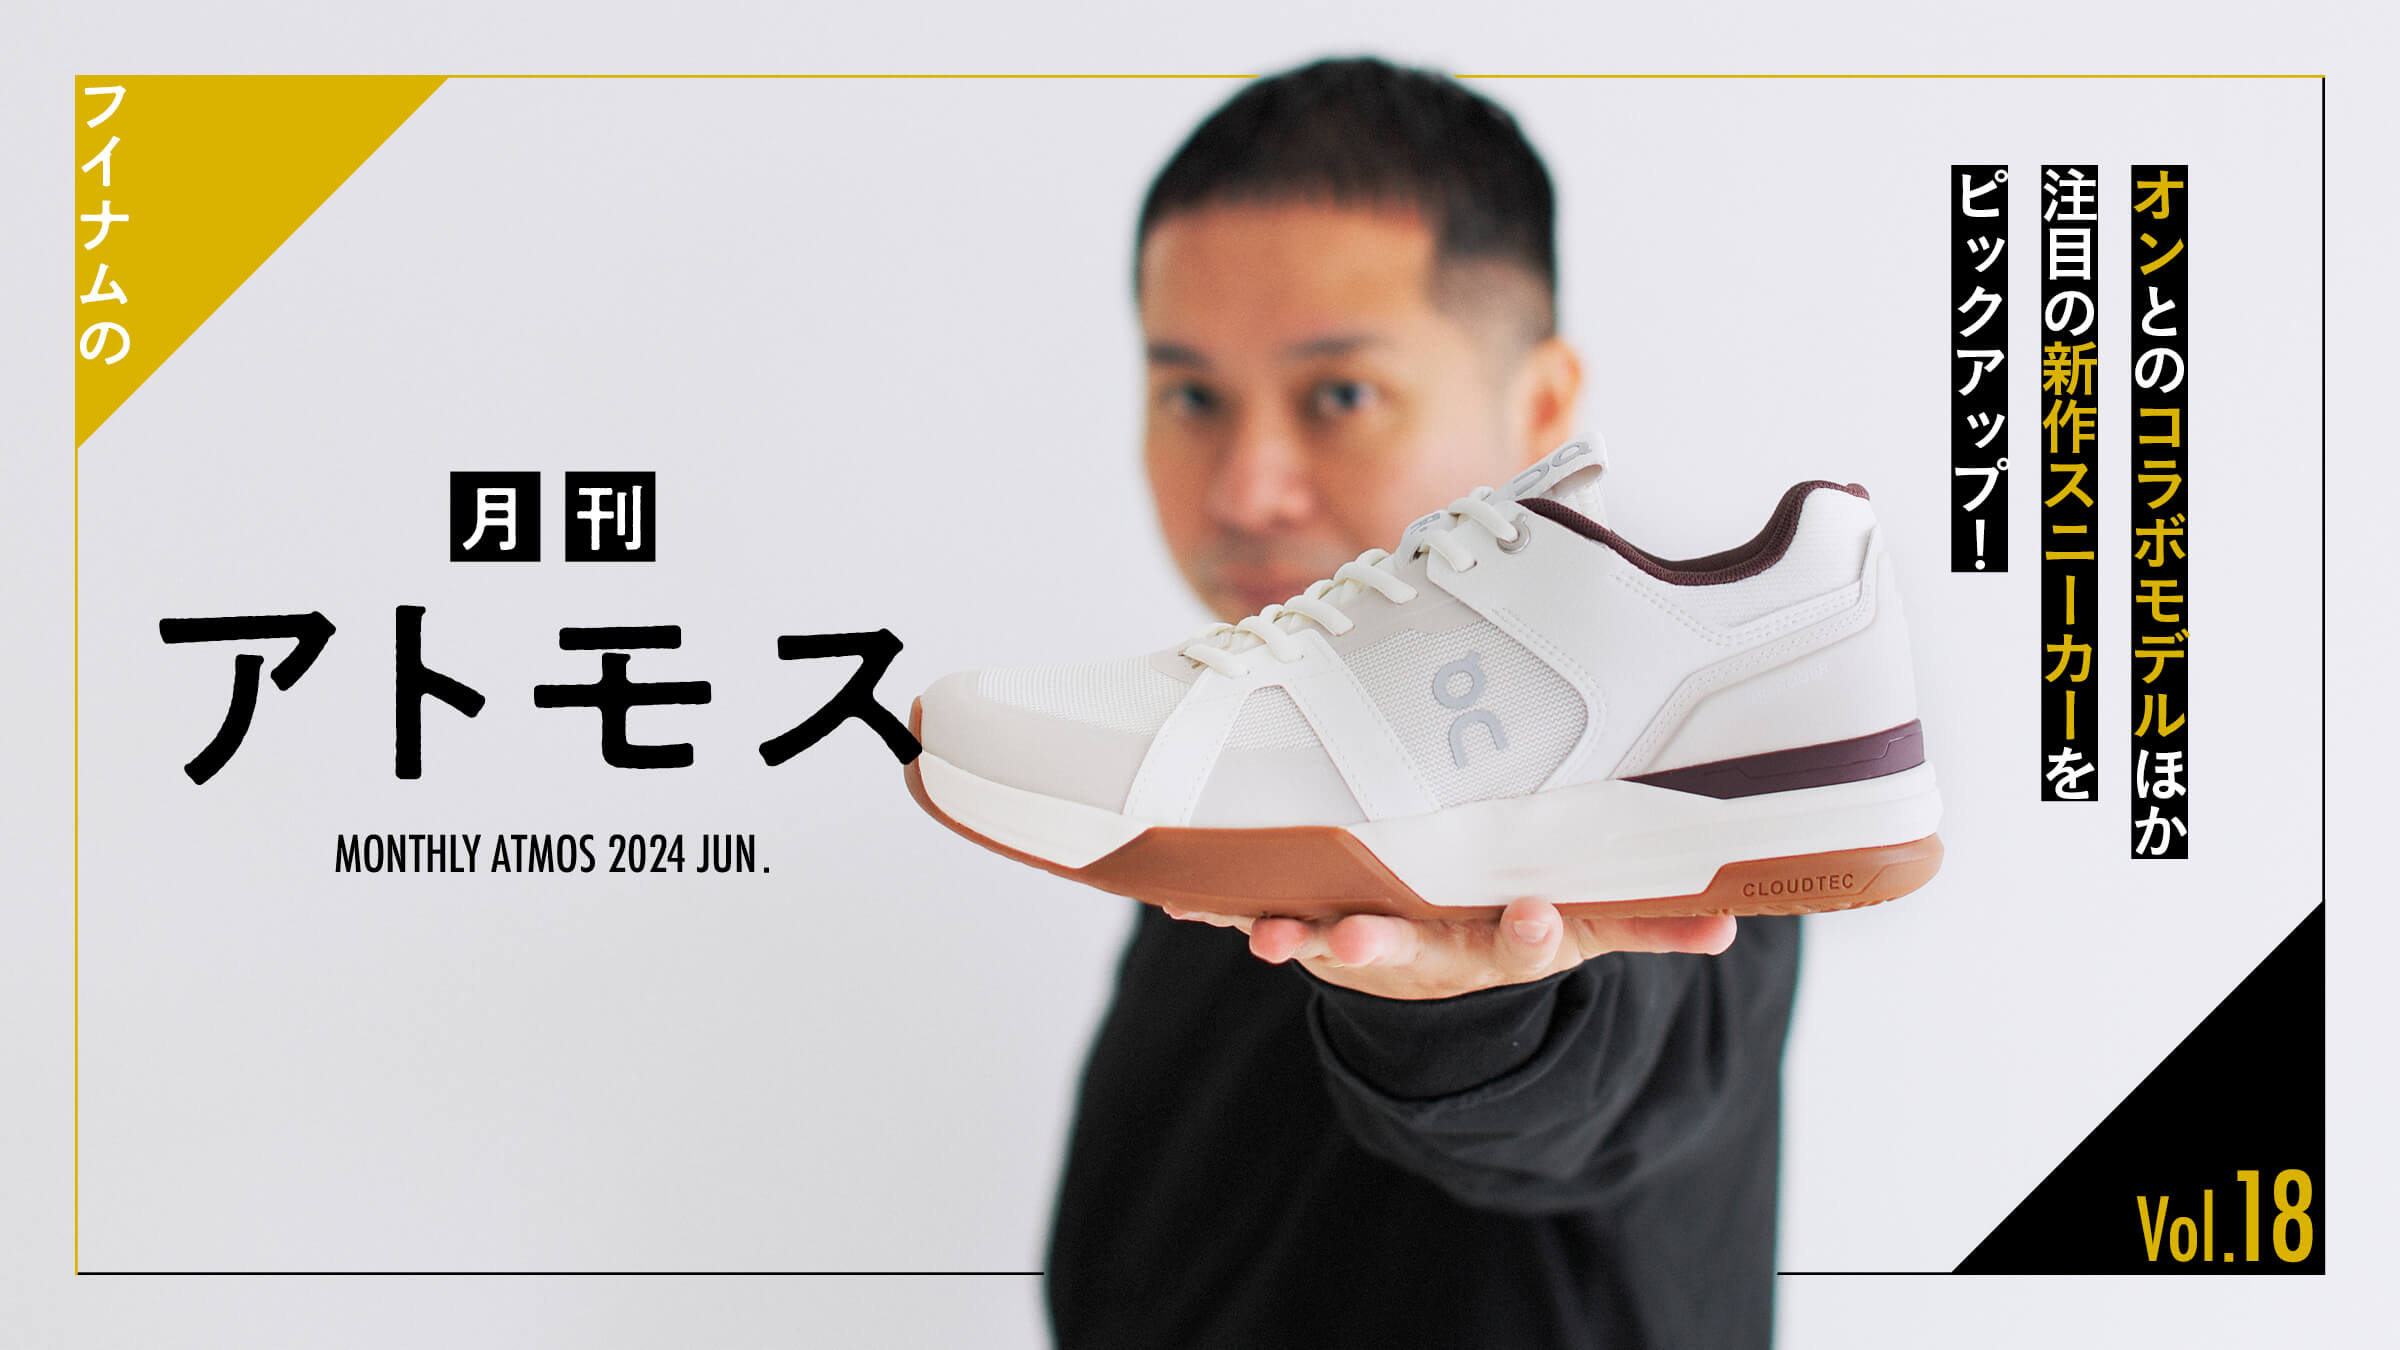 HOUYHNHNM's "Monthly ATMOS" Vol. 18 Pick up the collaboration model with ON and other hot new sneakers!